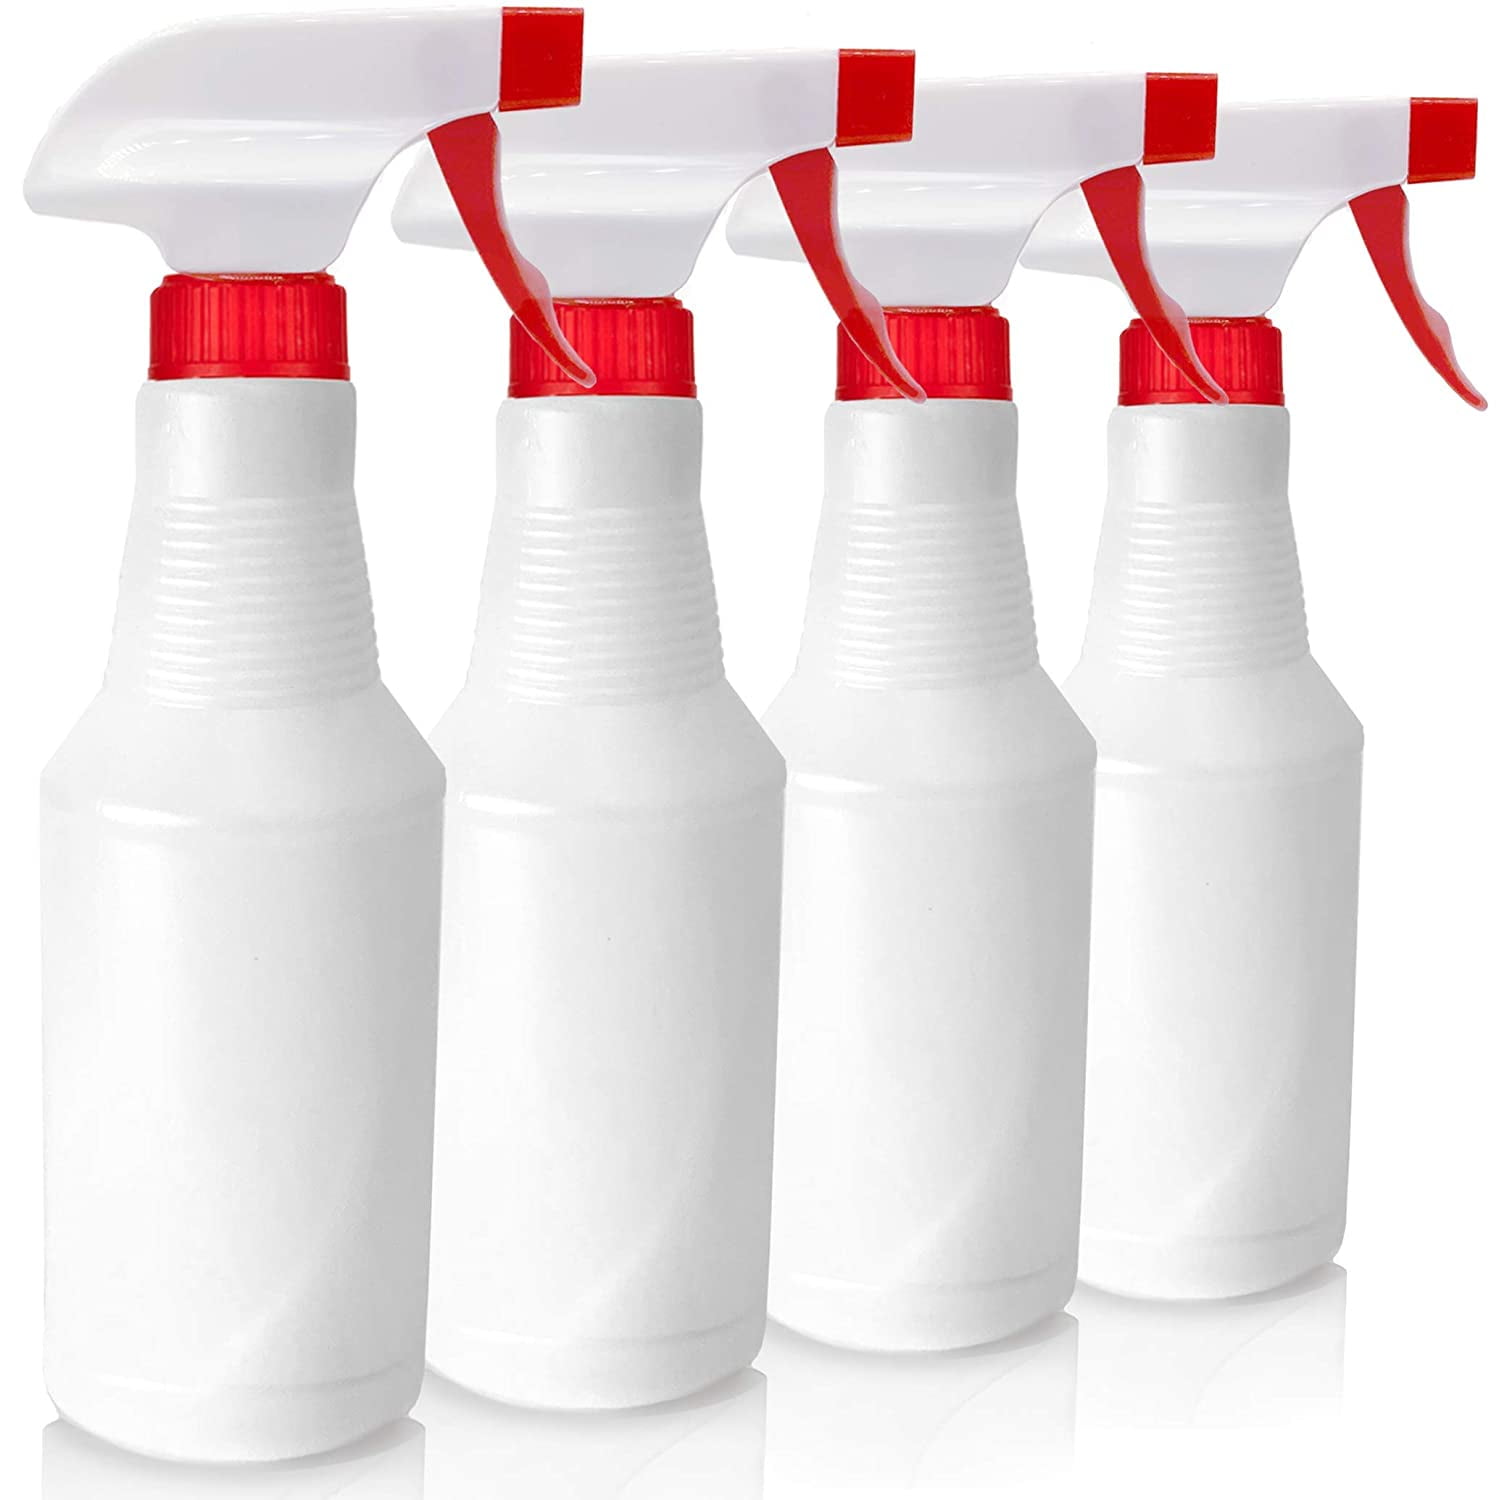 PSCPS Certol Accessories: Empty 16 oz Spray Bottle Labeled to Meet OSHA  Guidelines, Includes Spray Head & Squirt Top, 6/cs